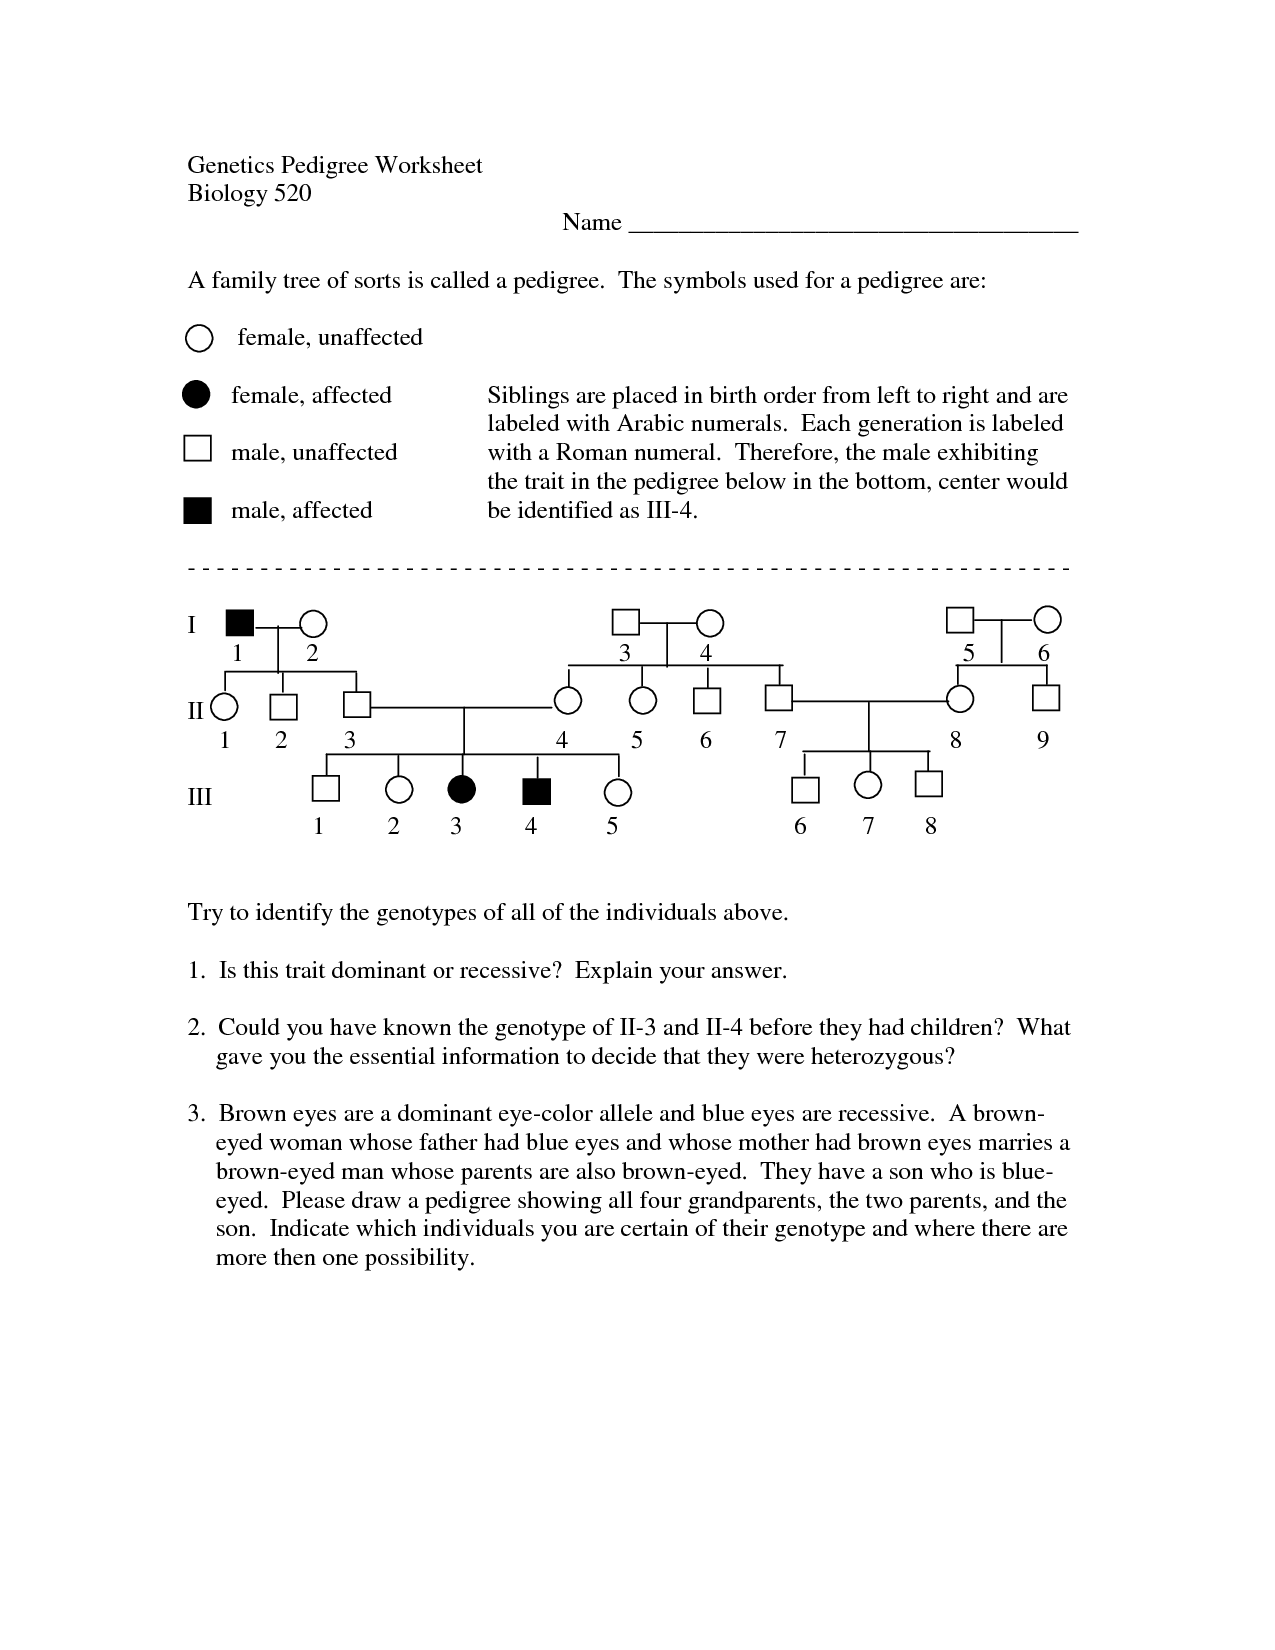 What Is A Pedigree Worksheet Answers